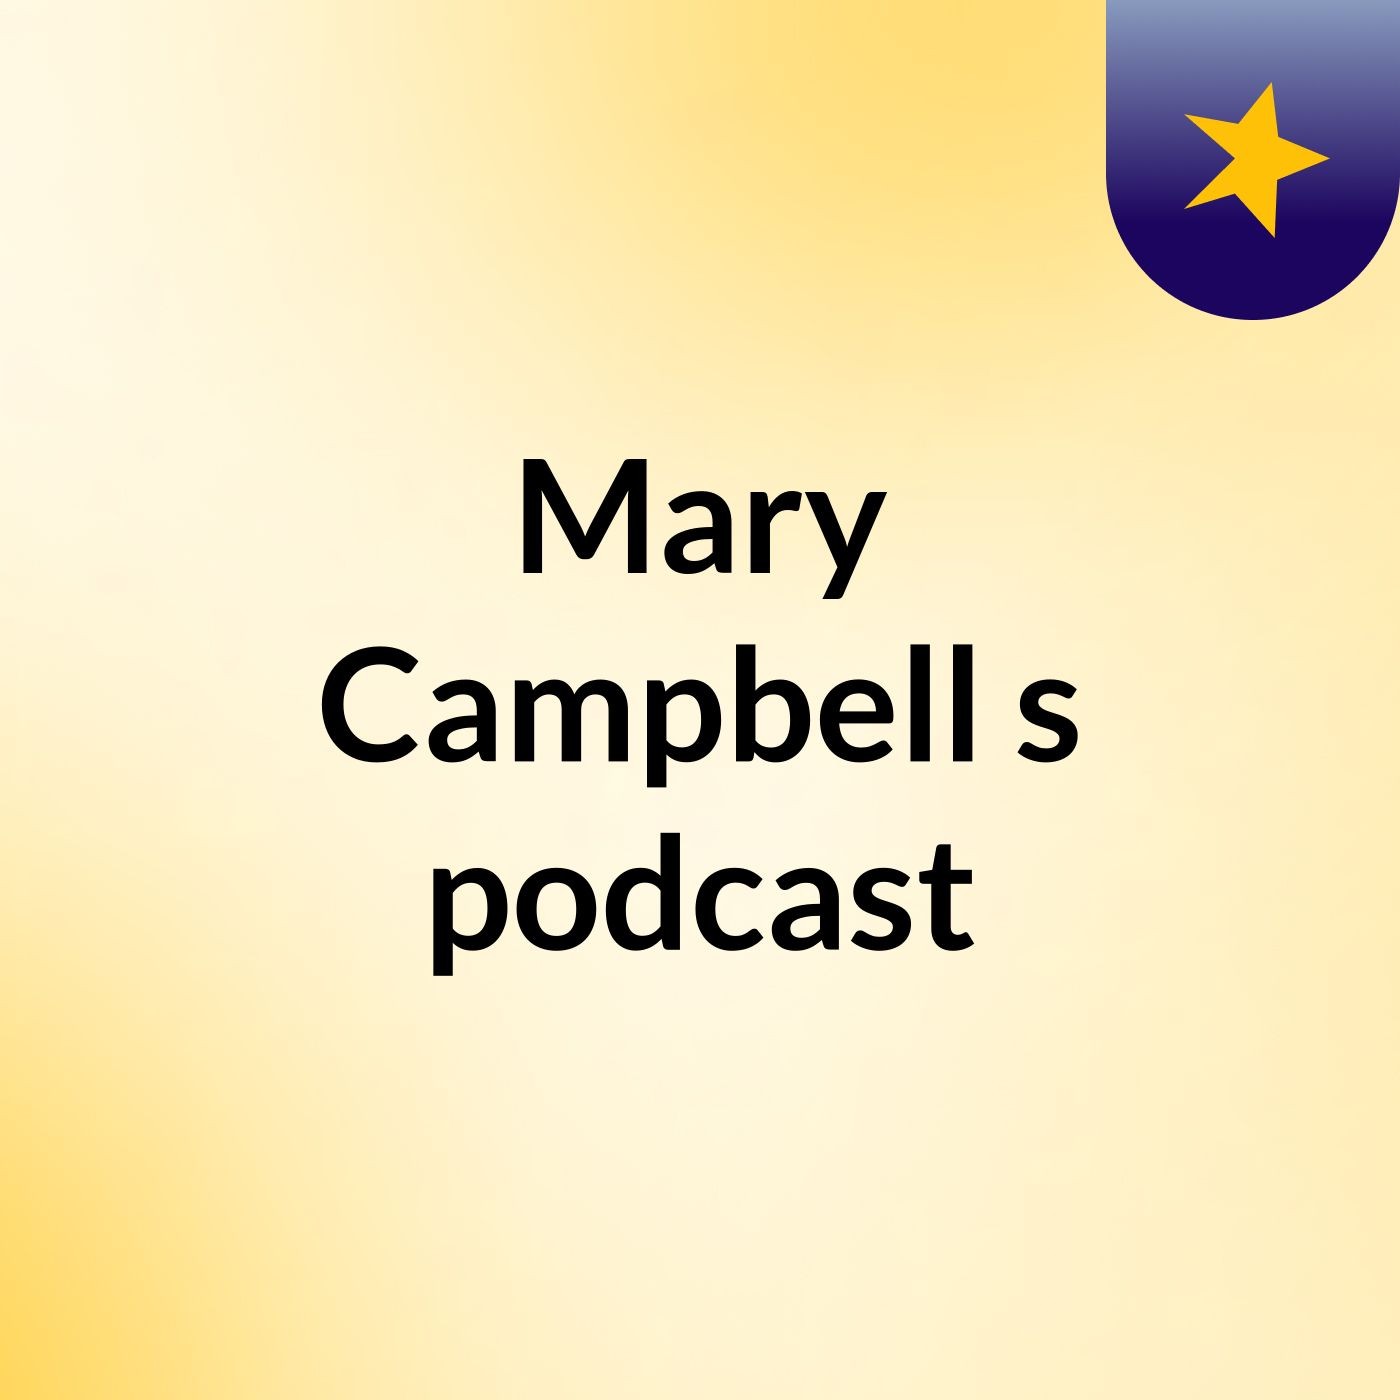 Episode 3 - Mary Campbell's podcast